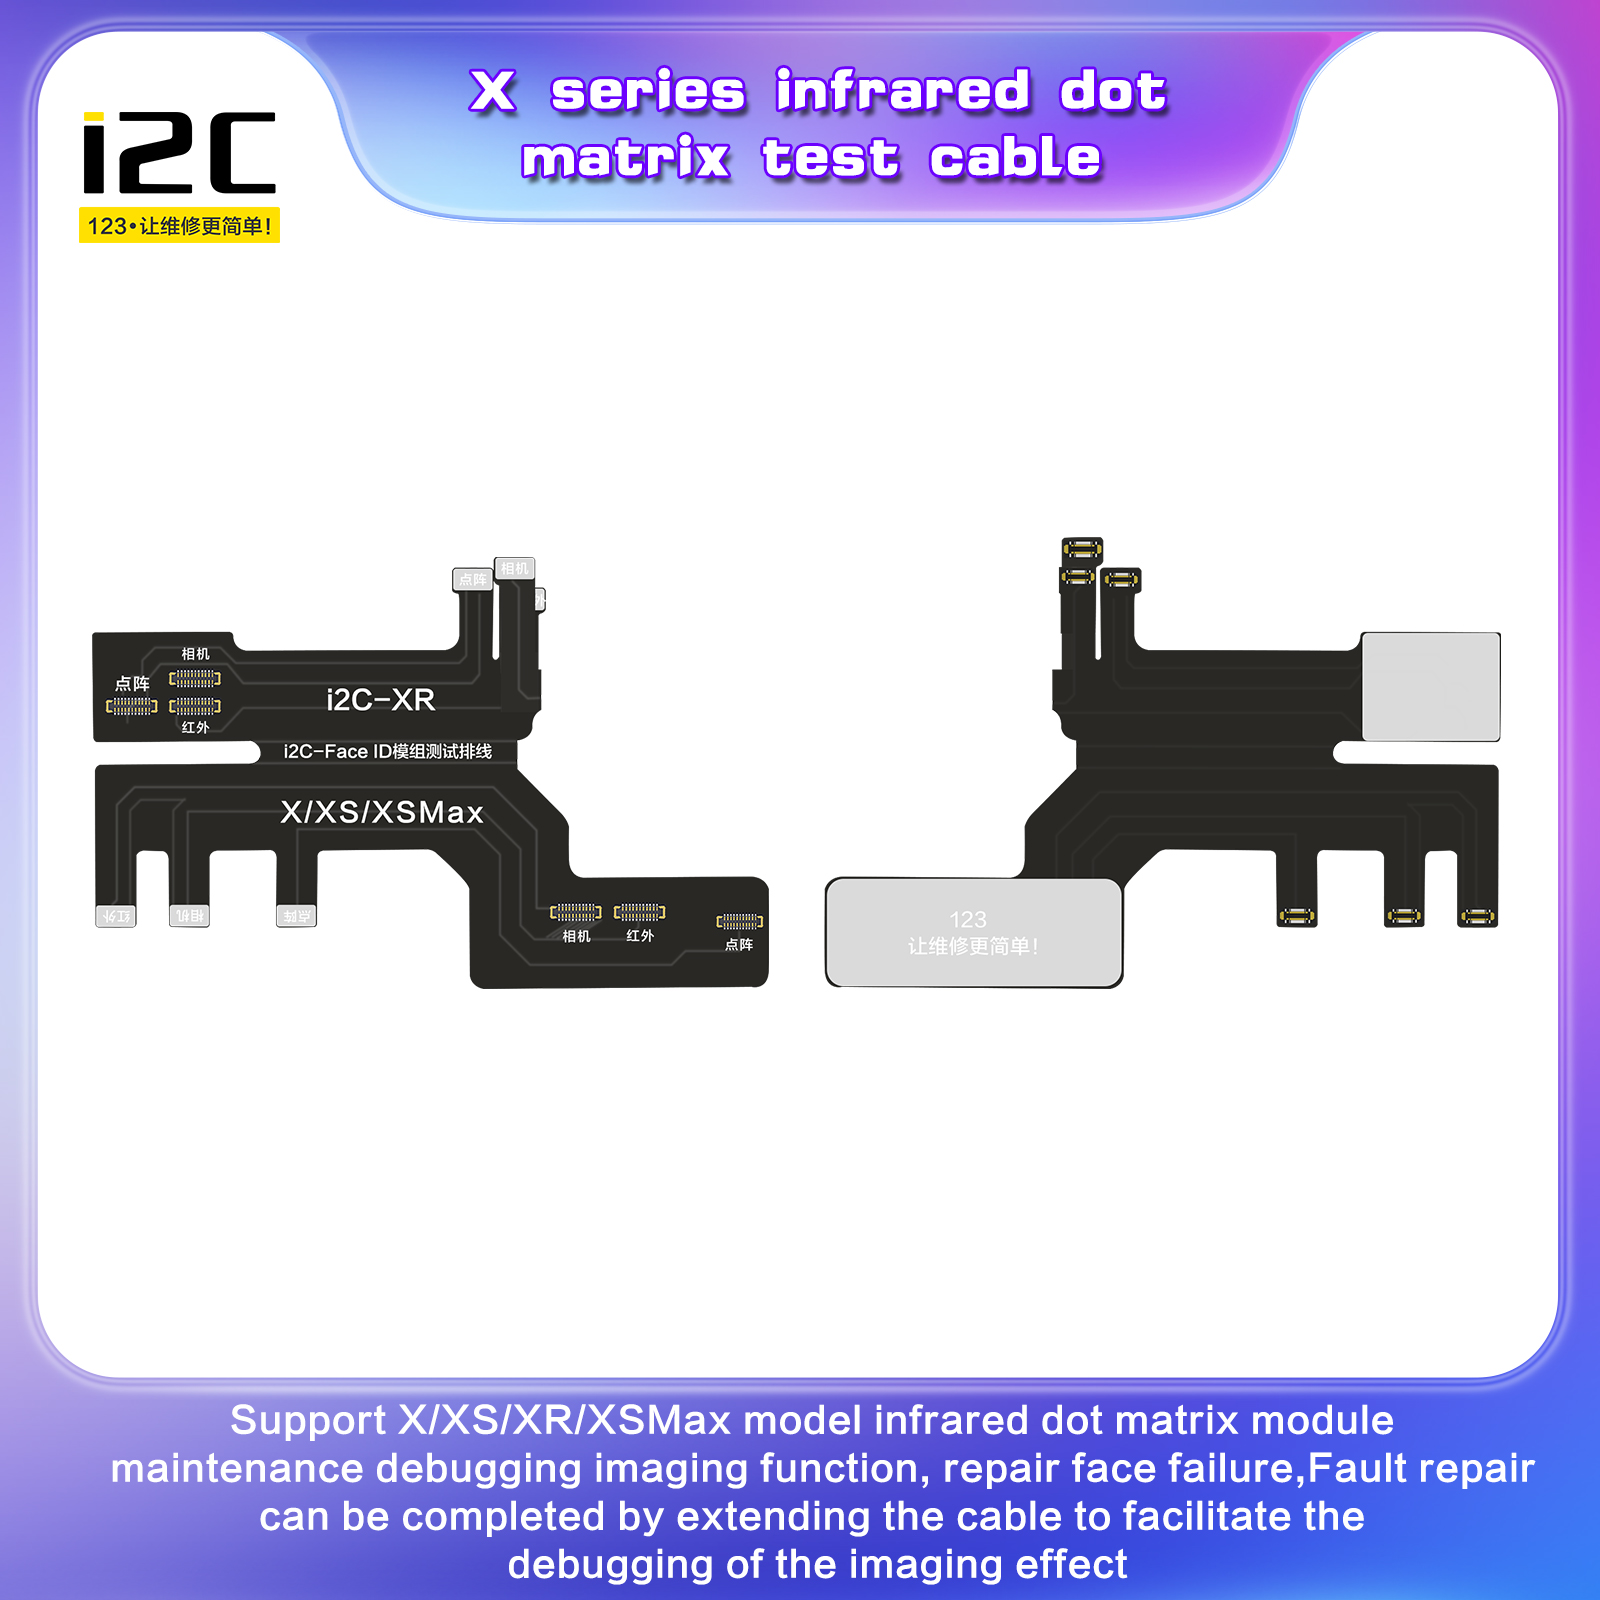 i2C13 series infrared dot matrix test cable(图1)